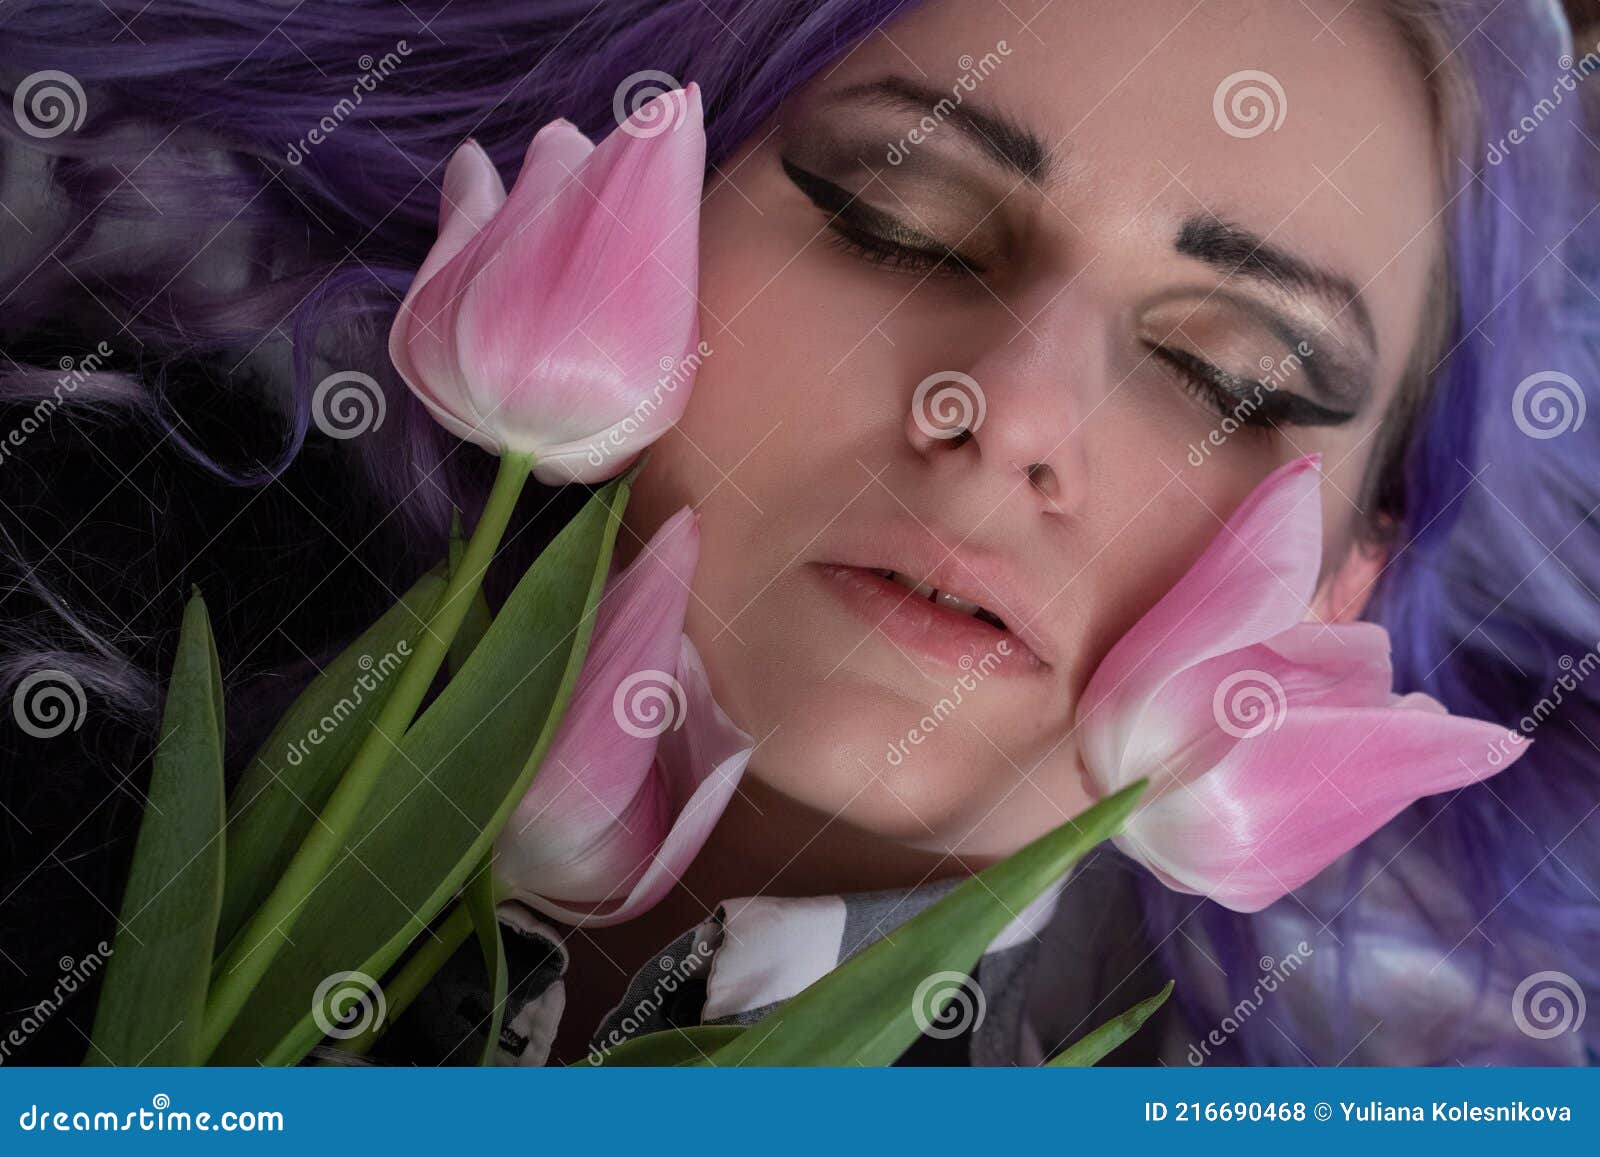 pink tulips on the background of a woman`s face